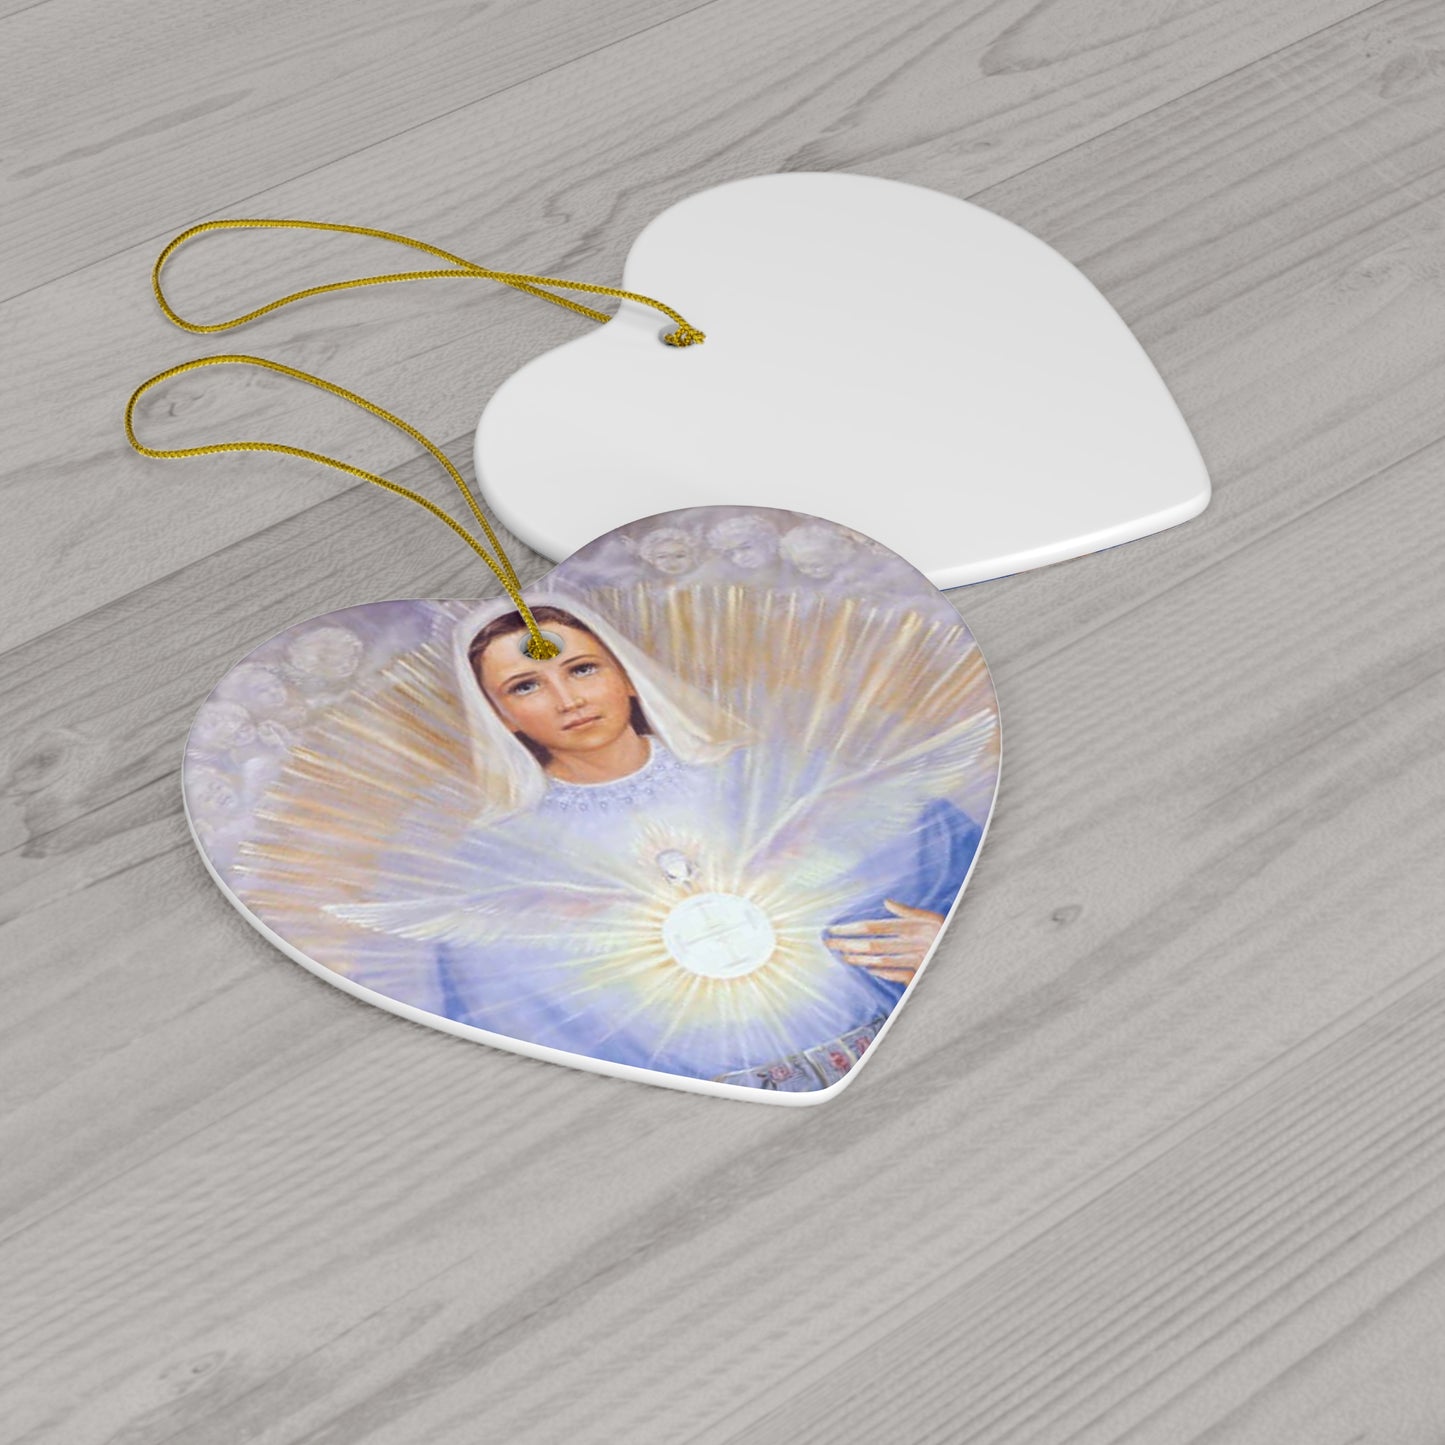 Catholic Christmas Ornament: Mary Mother of the Eucharist, Christmas Gift, Religious Ornament, Ceramic Ornament